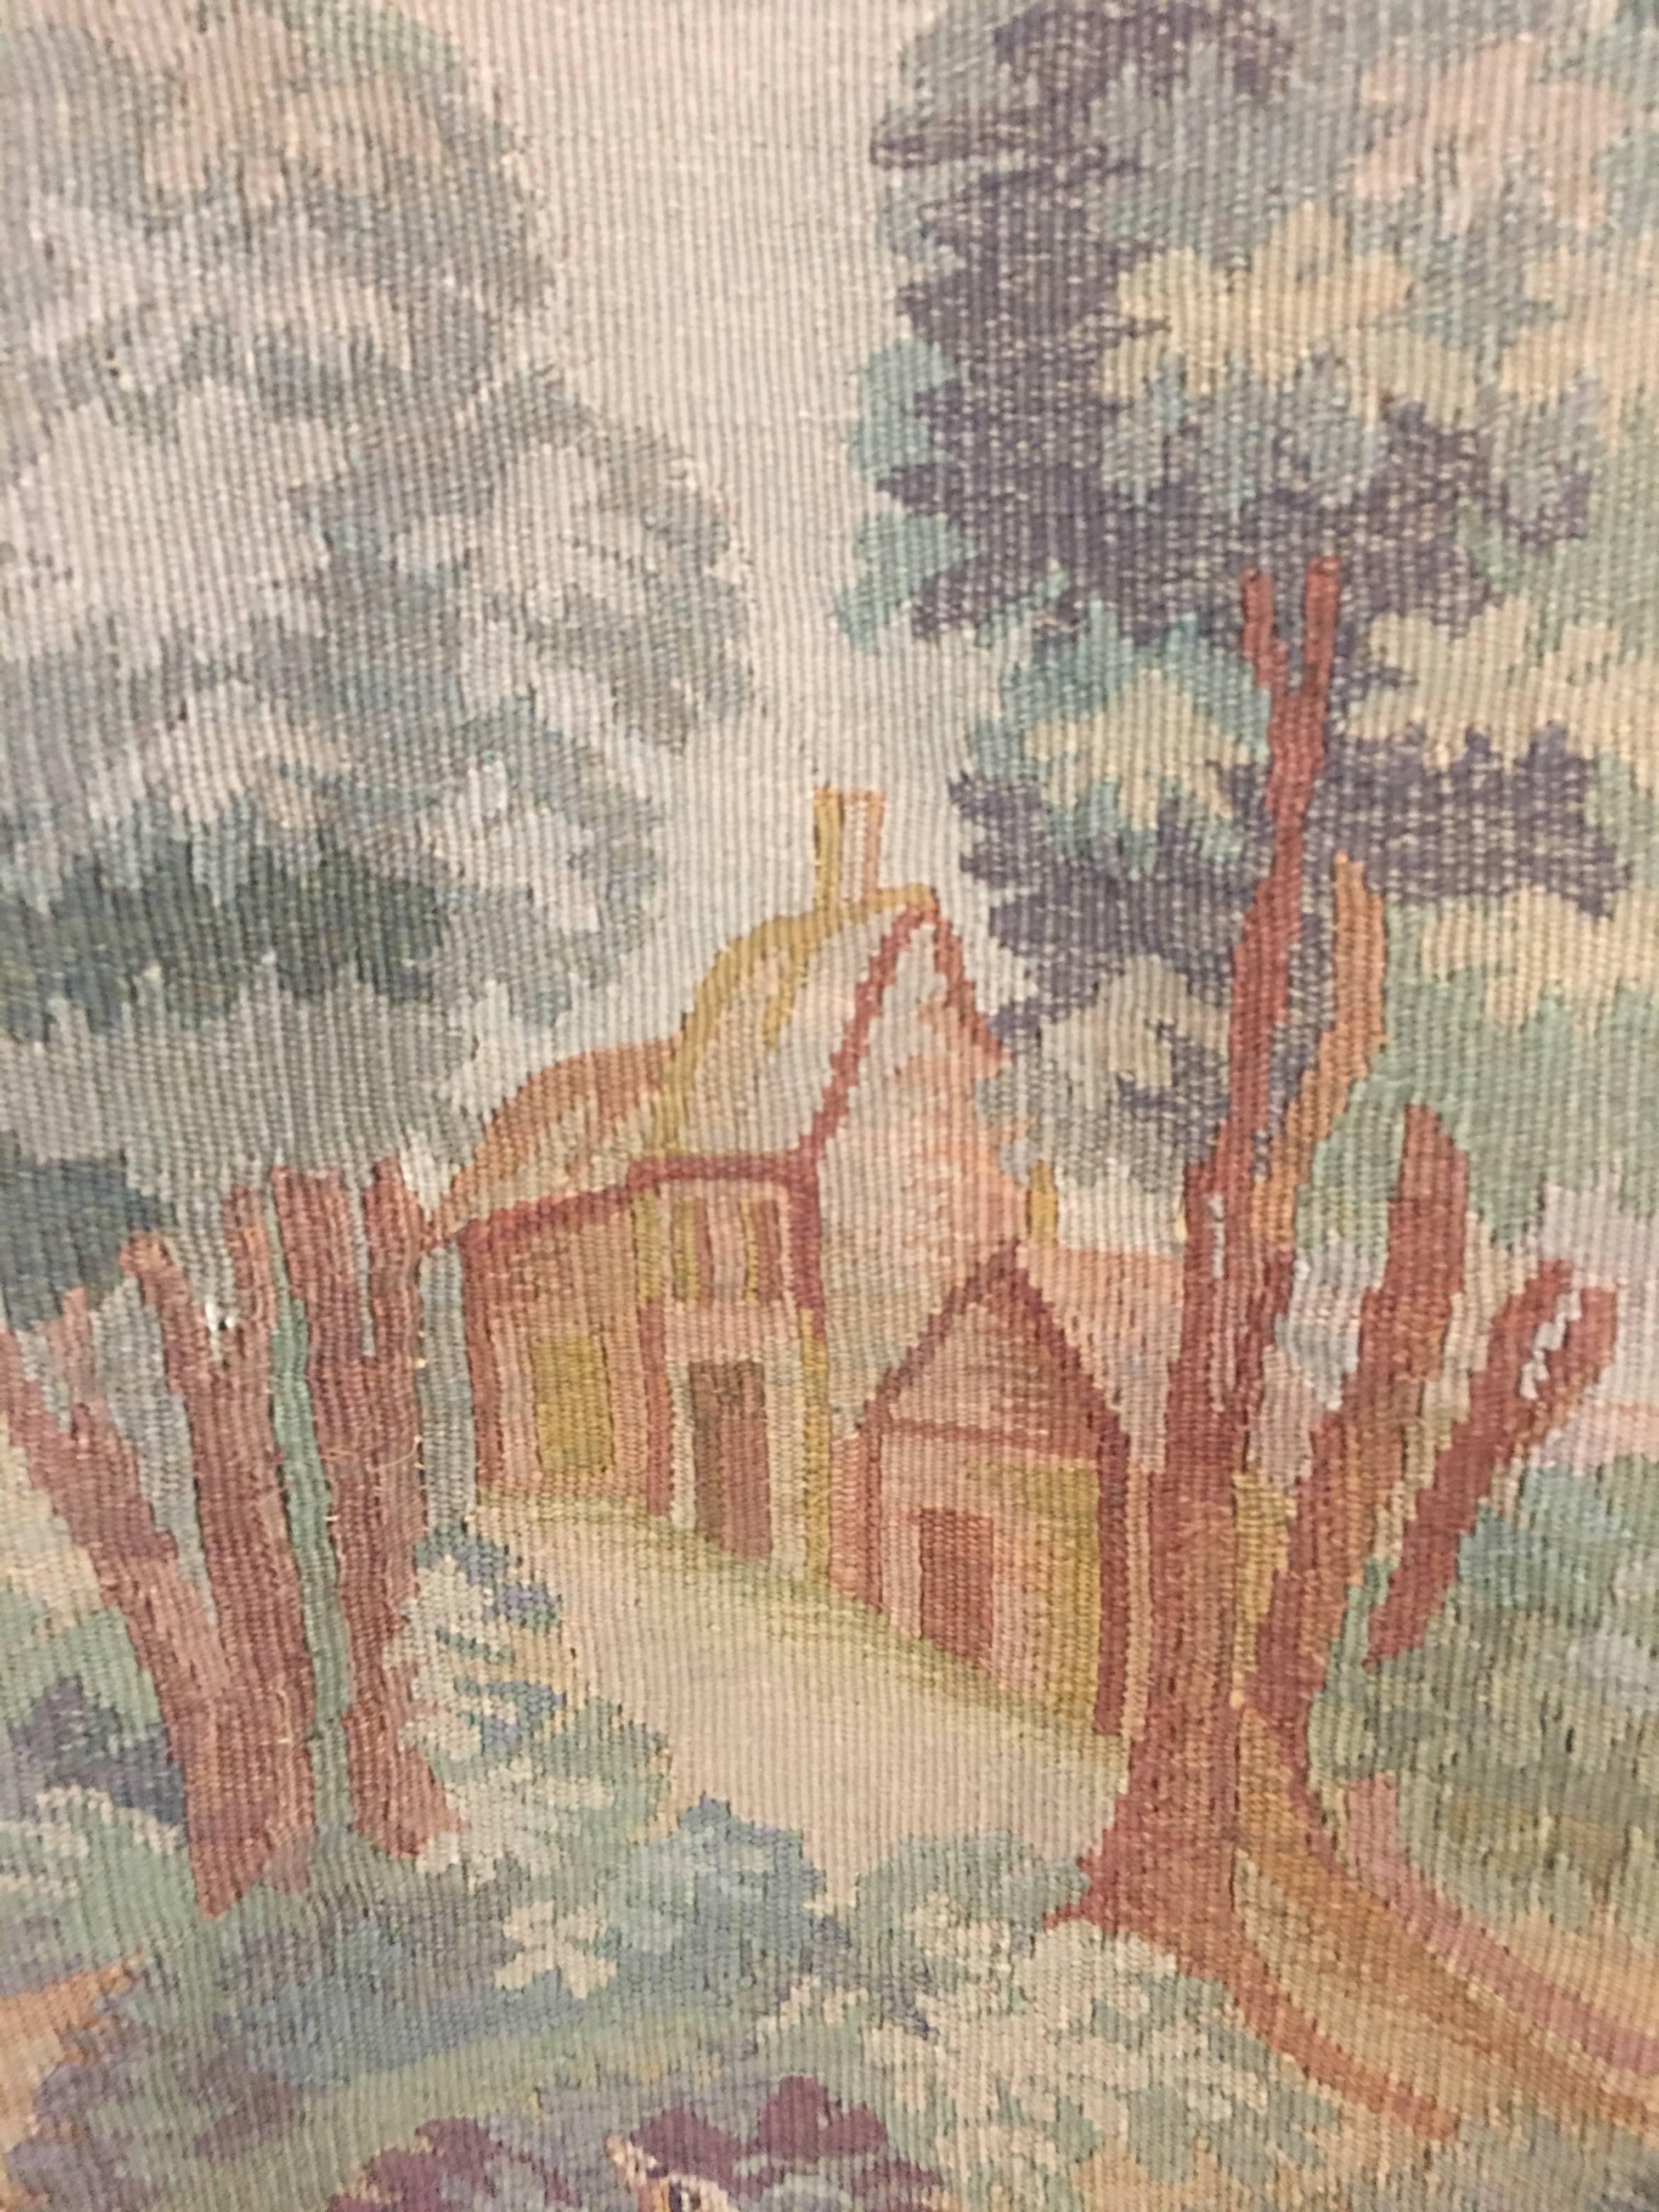 Hand-Woven French Aubusson Tapestry, circa 1850